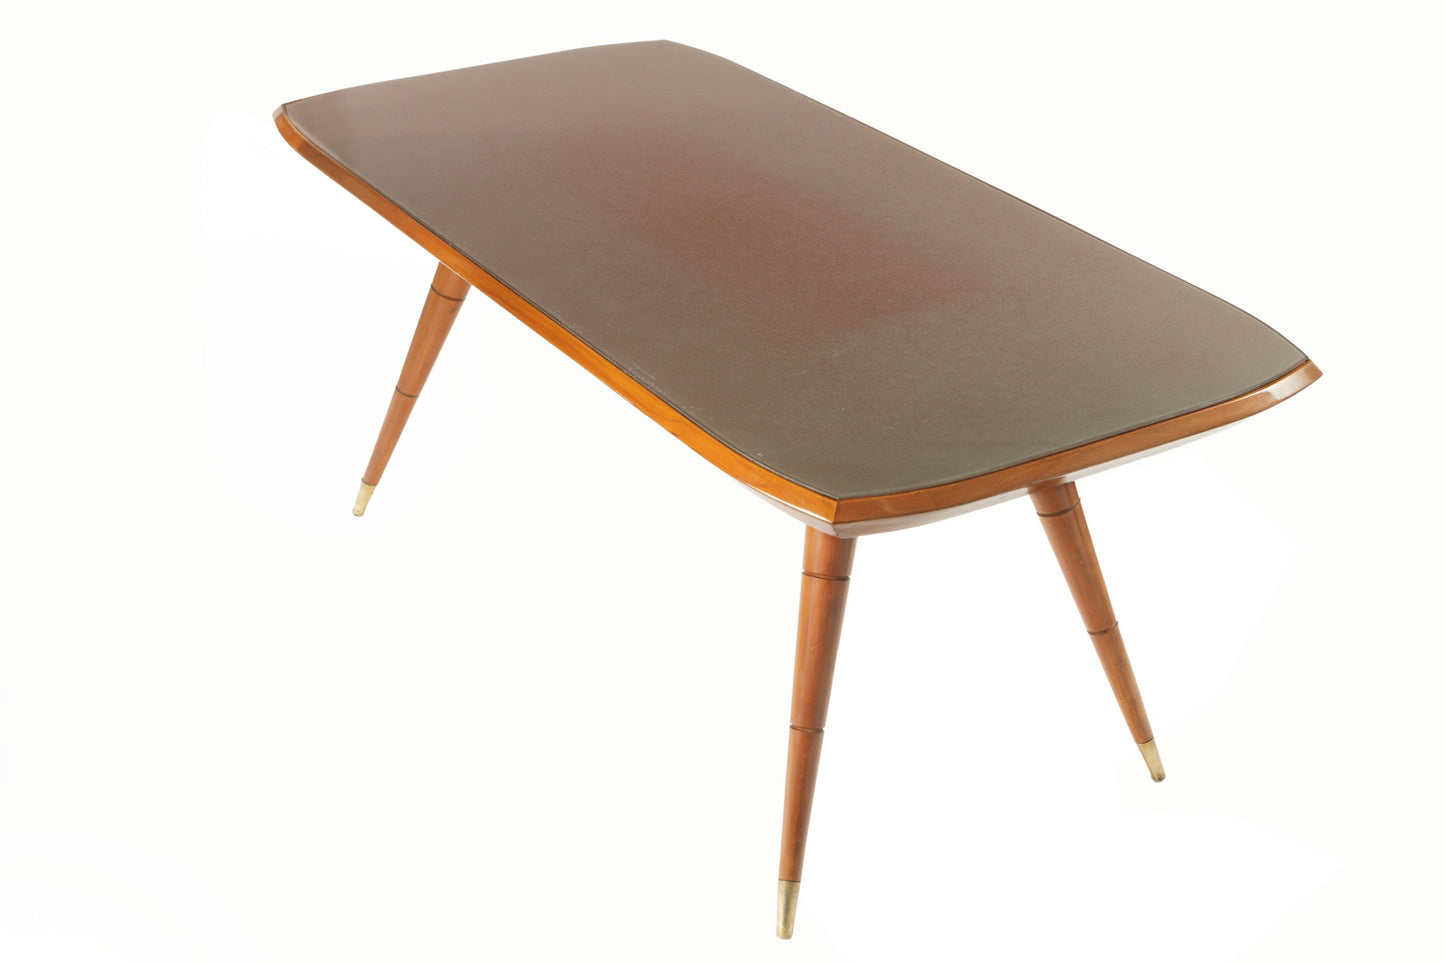 Fratelli Marelli table from the 1940s